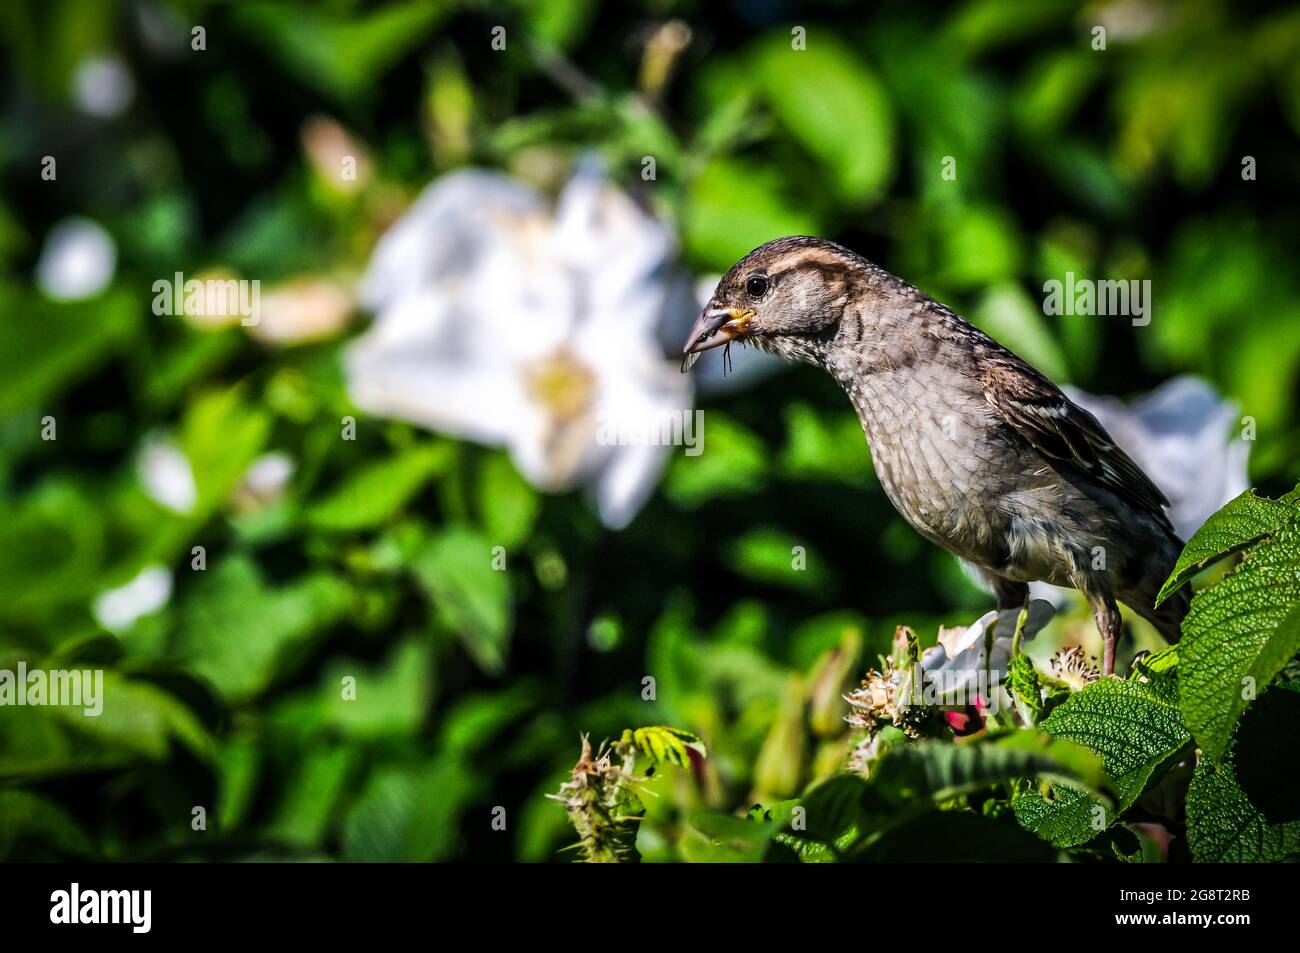 Dragonflies are very fast, but this Seaside Sparrow was a little faster. So while flying around the Sea Roses this Sparrow keeps well feed . Stock Photo